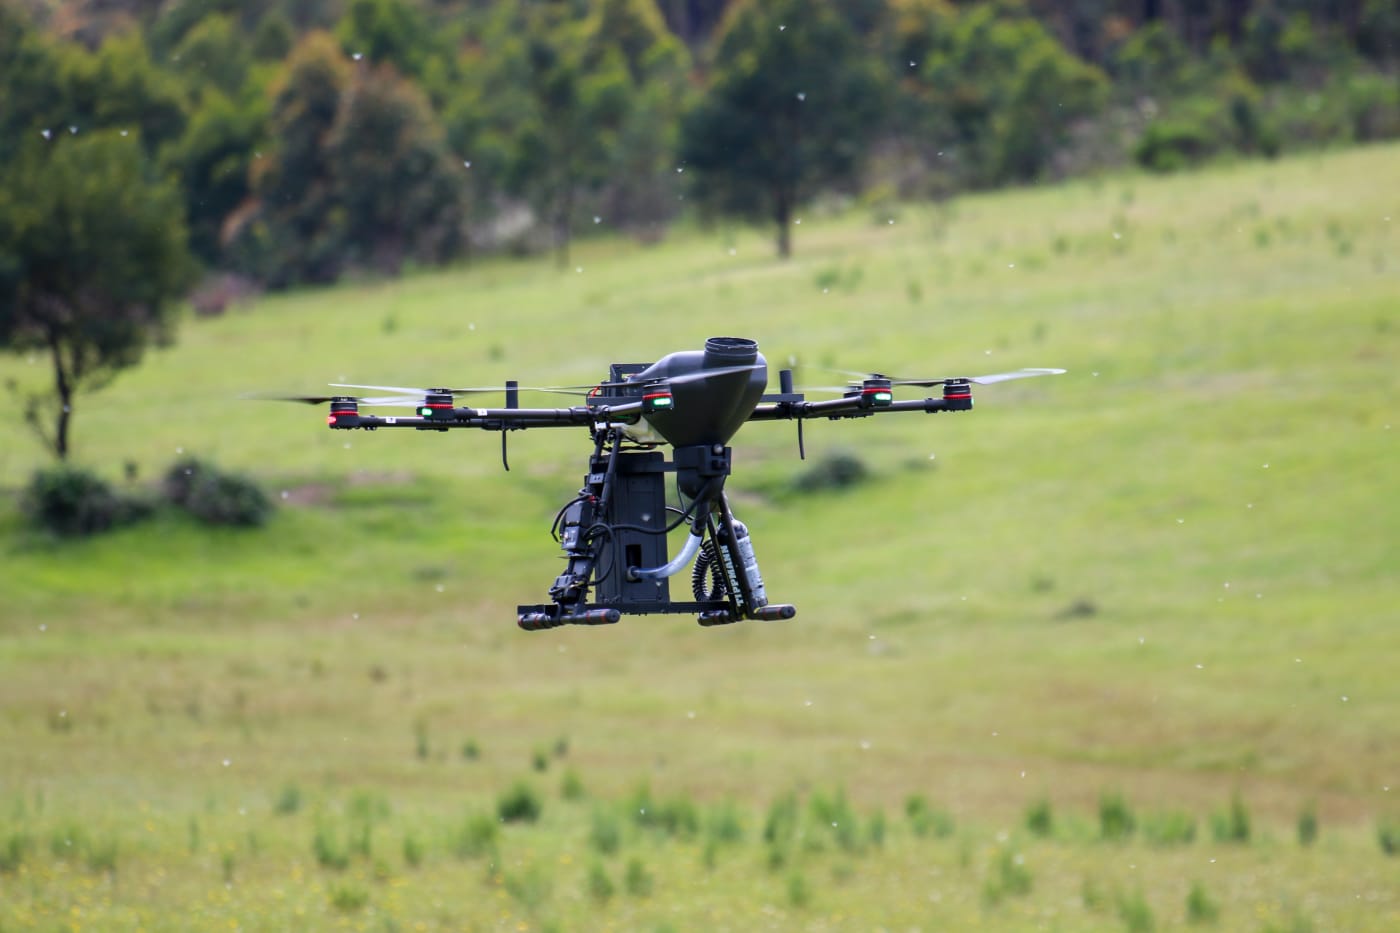 AirSeed Technologies demonstrate their seed-dispersing drones at a property at Marulan.